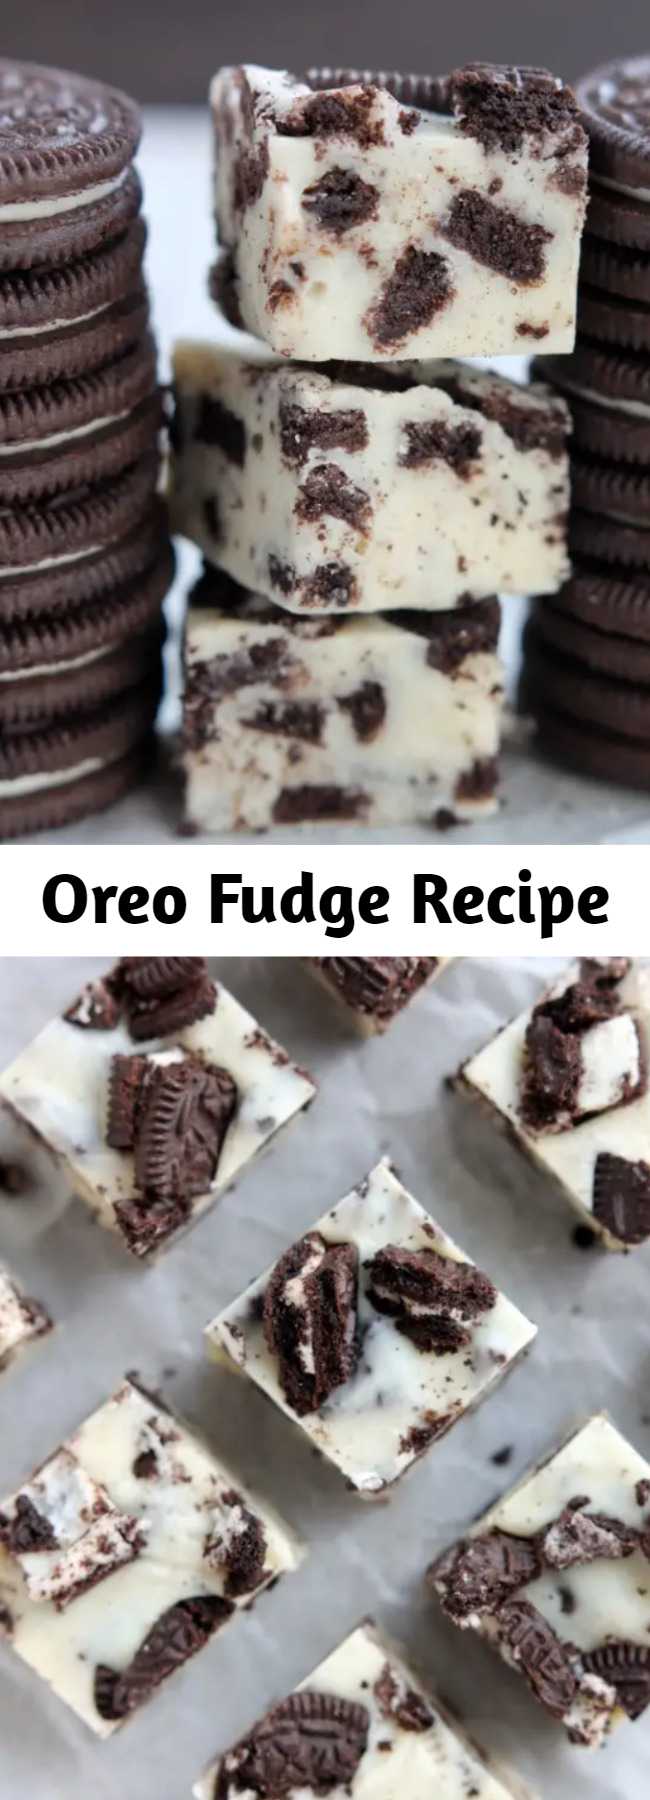 Oreo Fudge Recipe - This Oreo Fudge whips up fast, with only 3 ingredients! Perfect for Christmas neighbor plates!